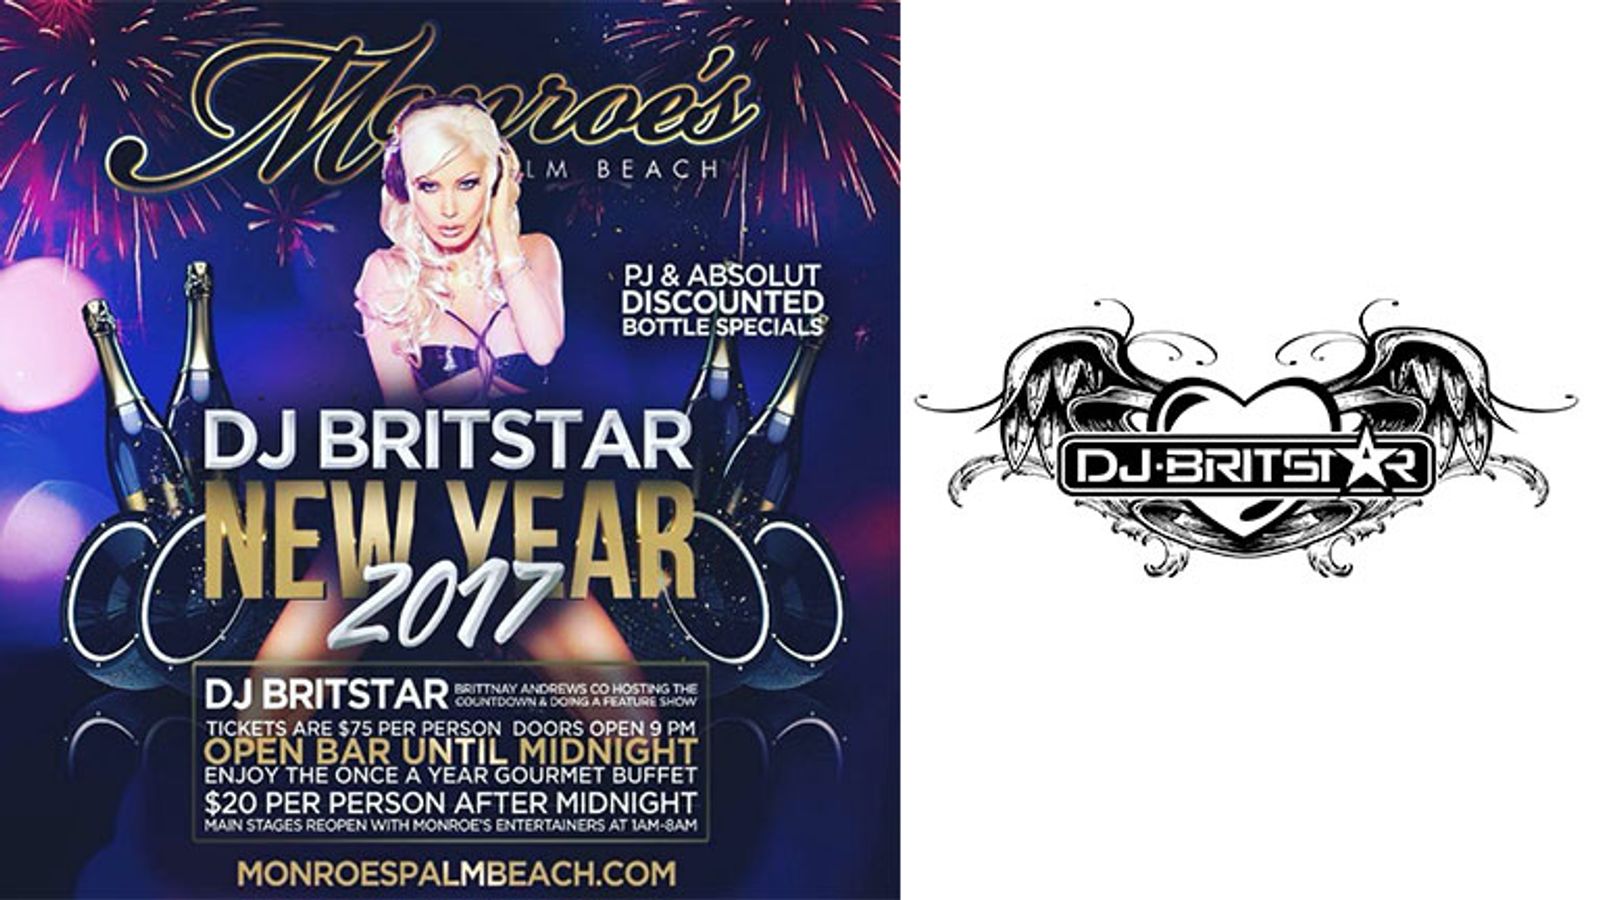 DJ BritStar Rings In the New Year In High Style In Palm Beach, FL